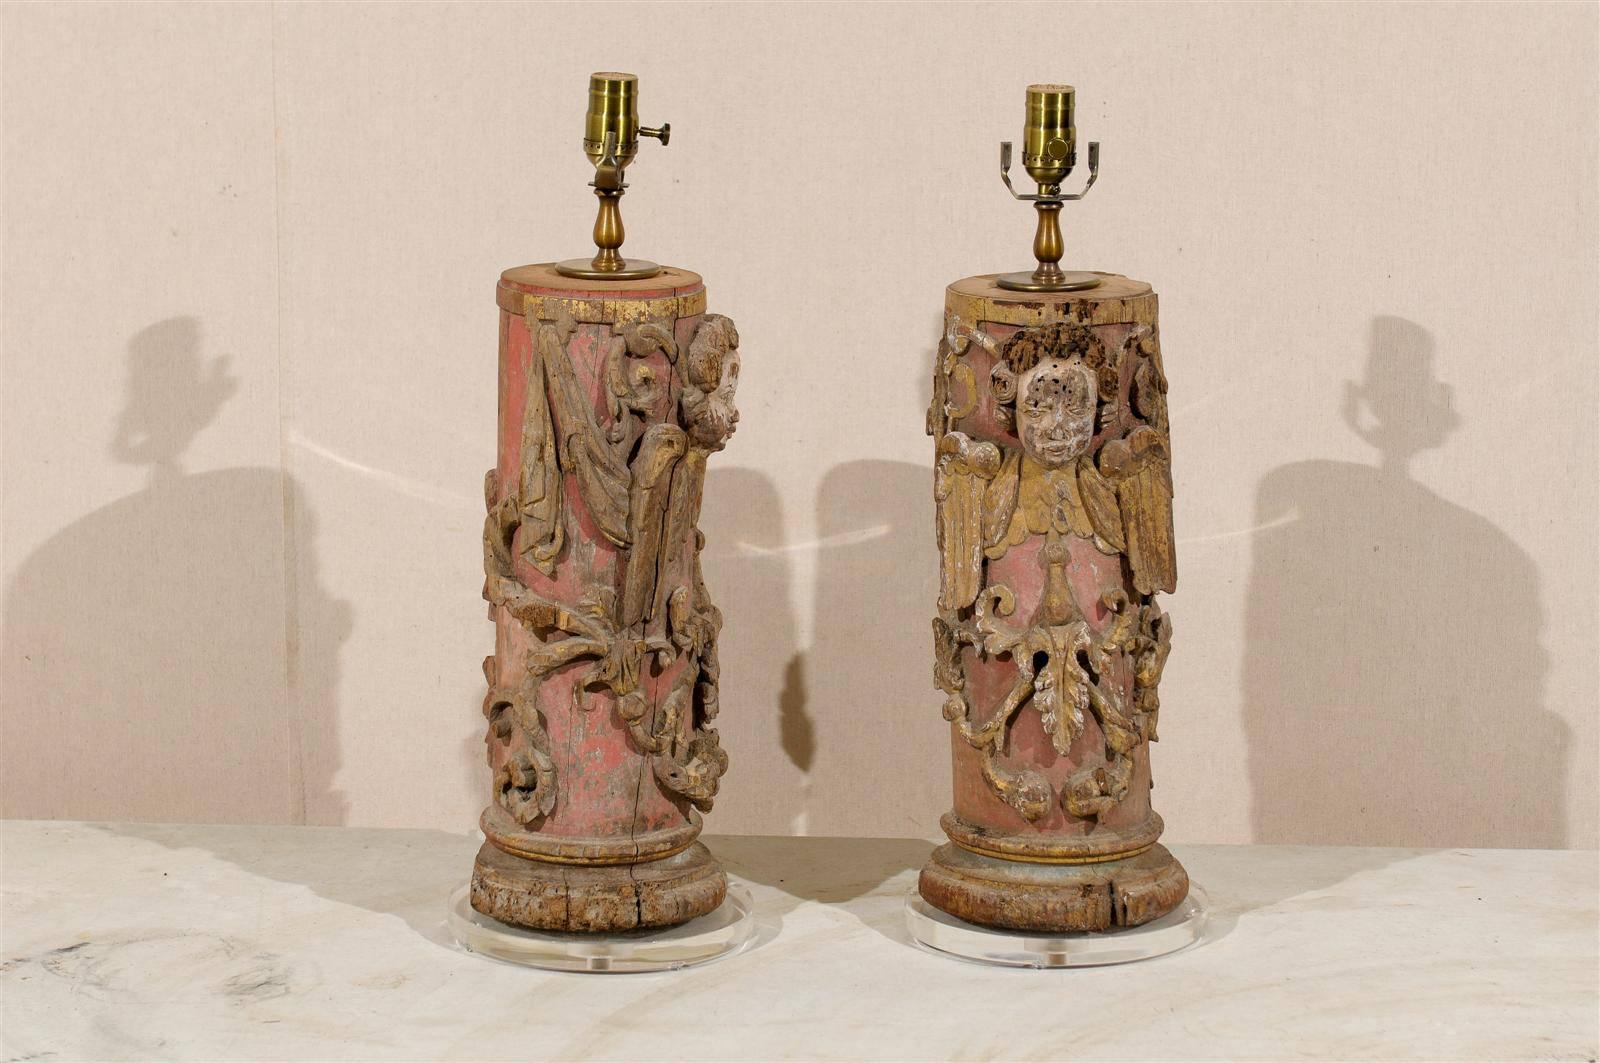 Pair of Portuguese 18th Century Painted Wood Table Lamps with Angel Depiction In Good Condition For Sale In Atlanta, GA